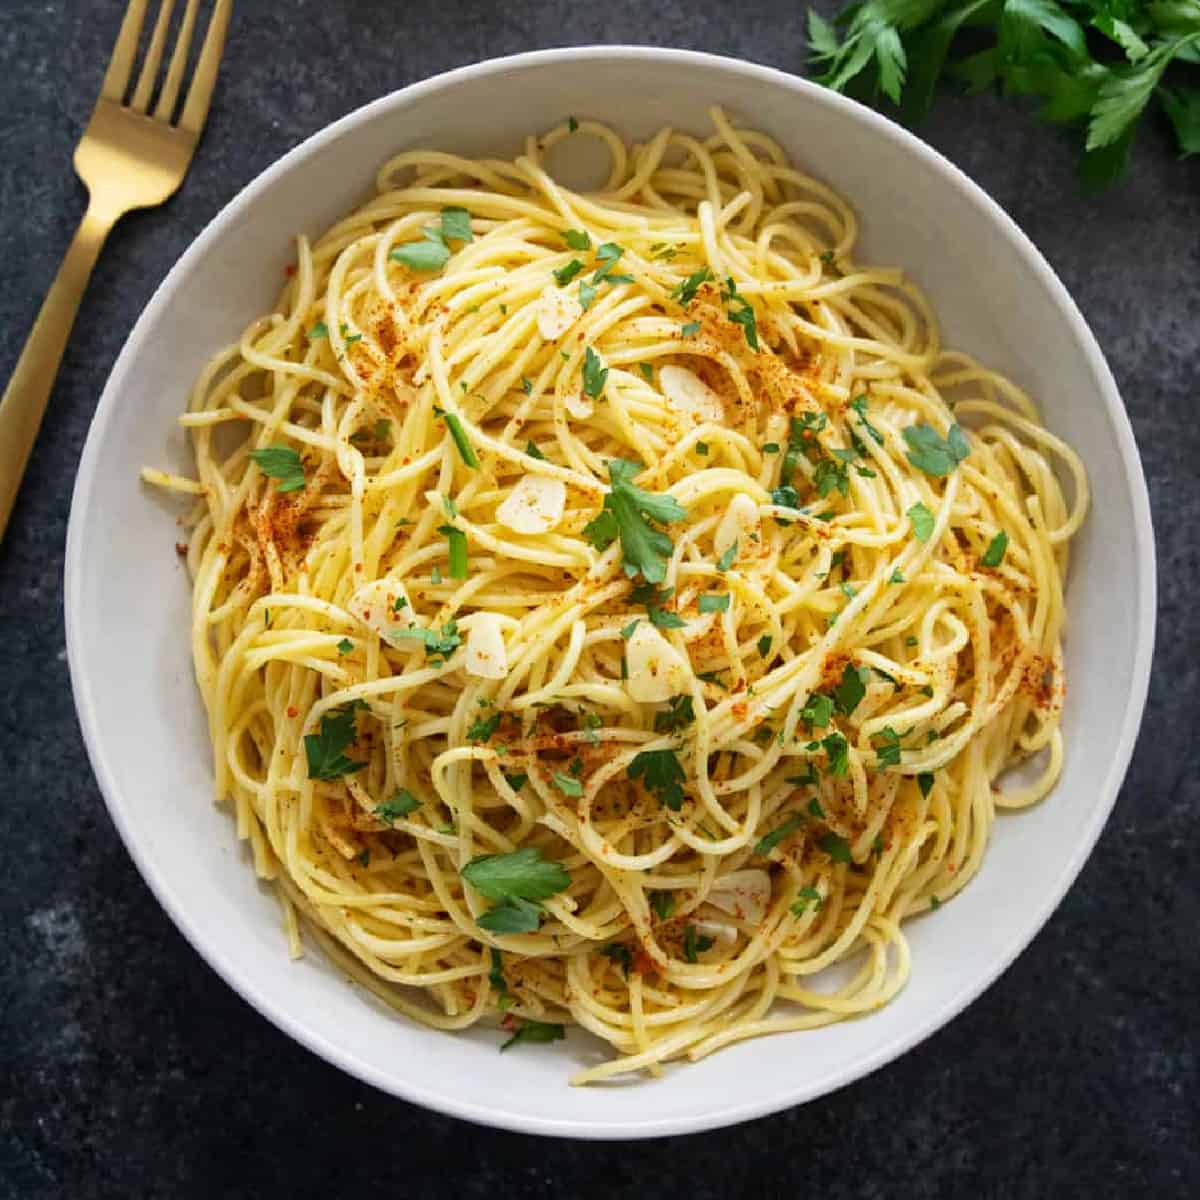 Ready in 20 minutes, spaghetti aglio e olio is a classic Italian pasta dish that only requires a few ingredients. It's one of those inexpensive weeknight meals that proves that simple can be delicious!
